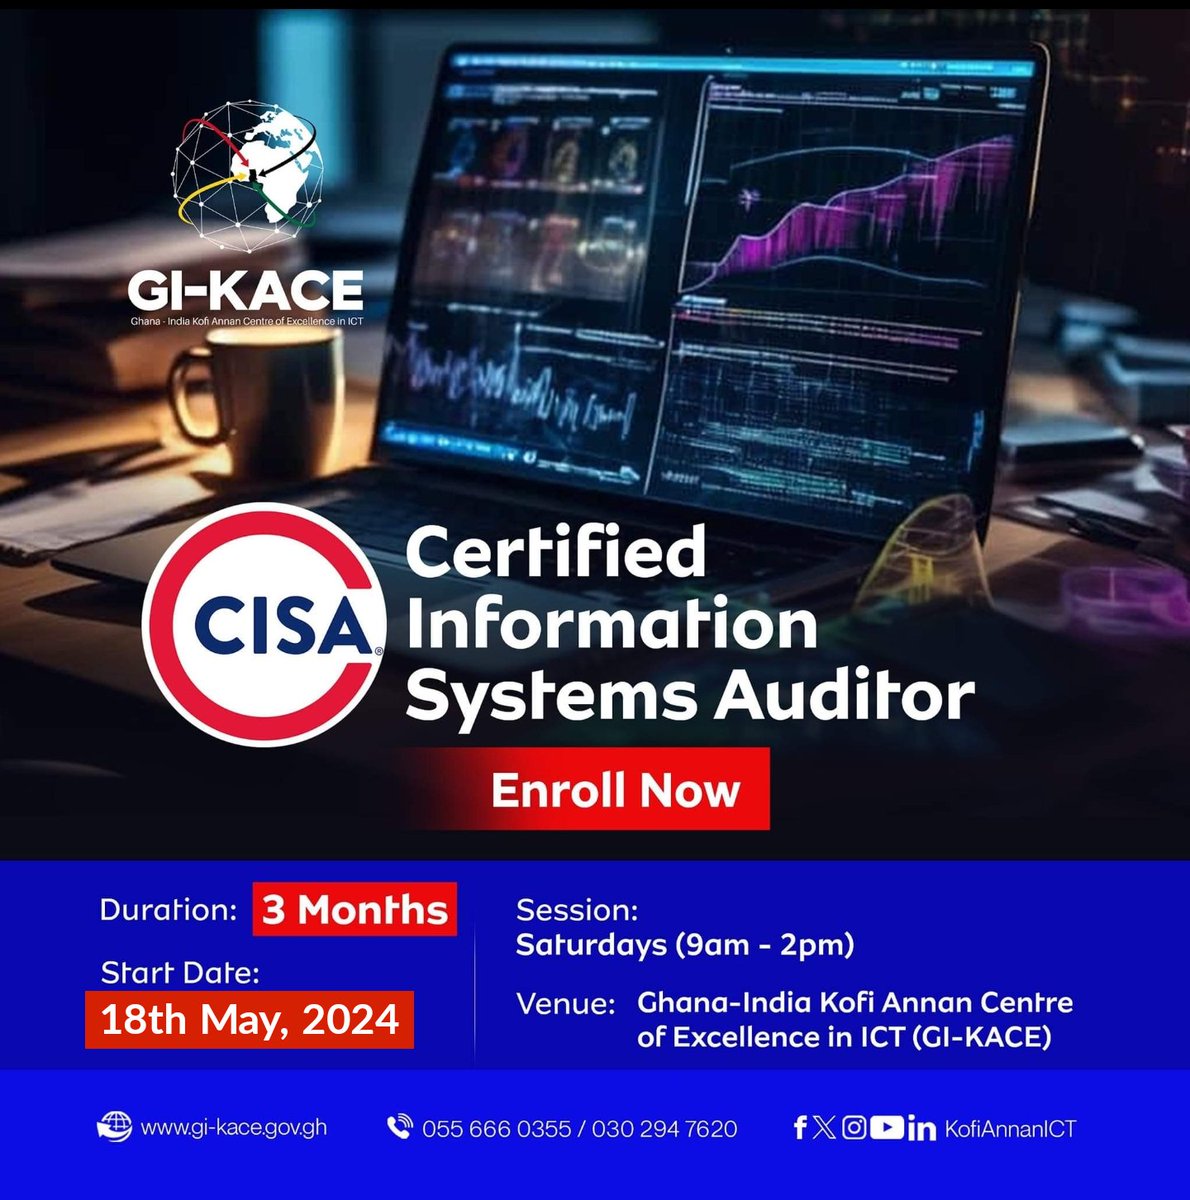 Join our three month intensive CISA course to boost your career opportunities and meet the global demand for networking professionals.

Call us 0556660355 now to enrol.

#GIKACE #kofiannanict #GhanaIndiaKofiAnnanCentreOfExcellenceinICT